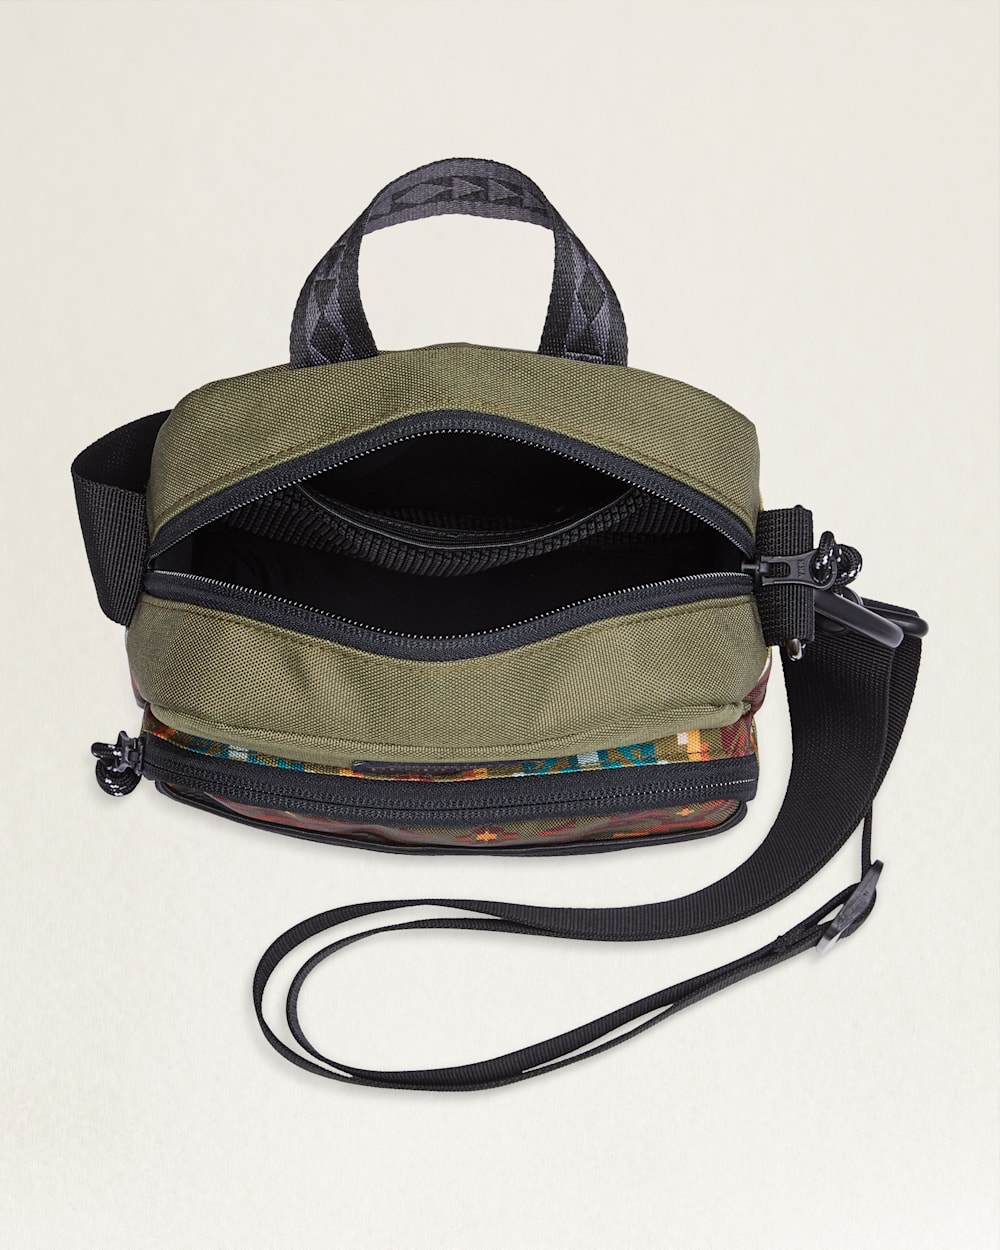 ALTERNATE VIEW OF CARICO LAKE CROSSBODY BAG IN OLIVE image number 3